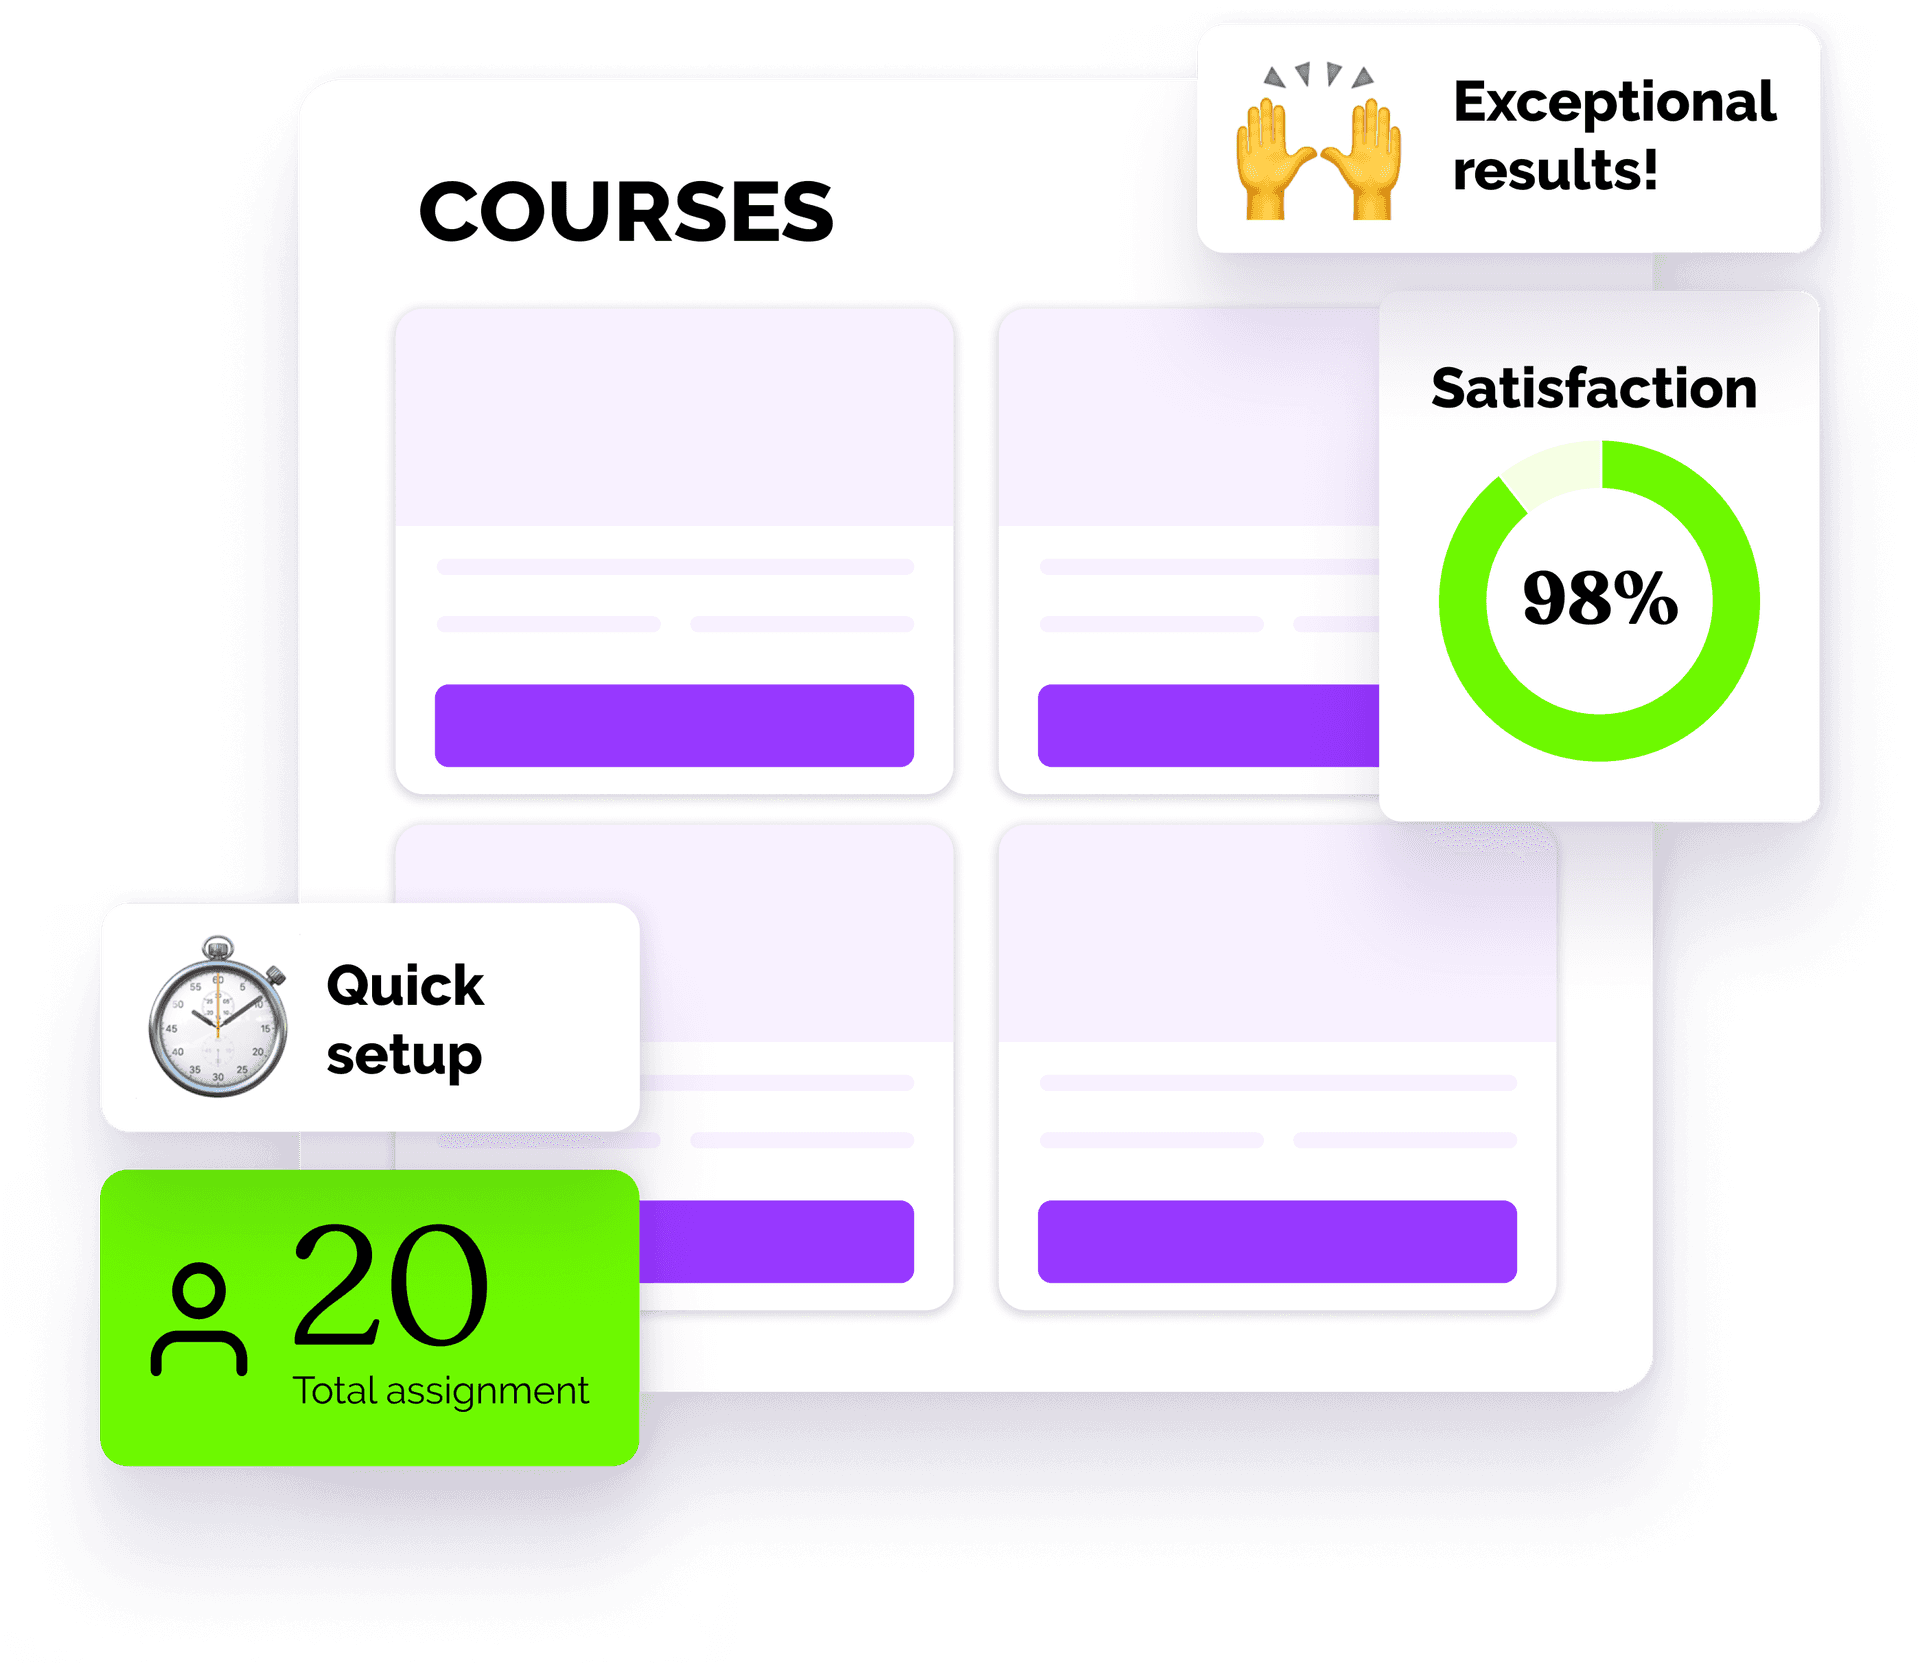 Courses, quick setup, exceptional results. Satisfaction 98%